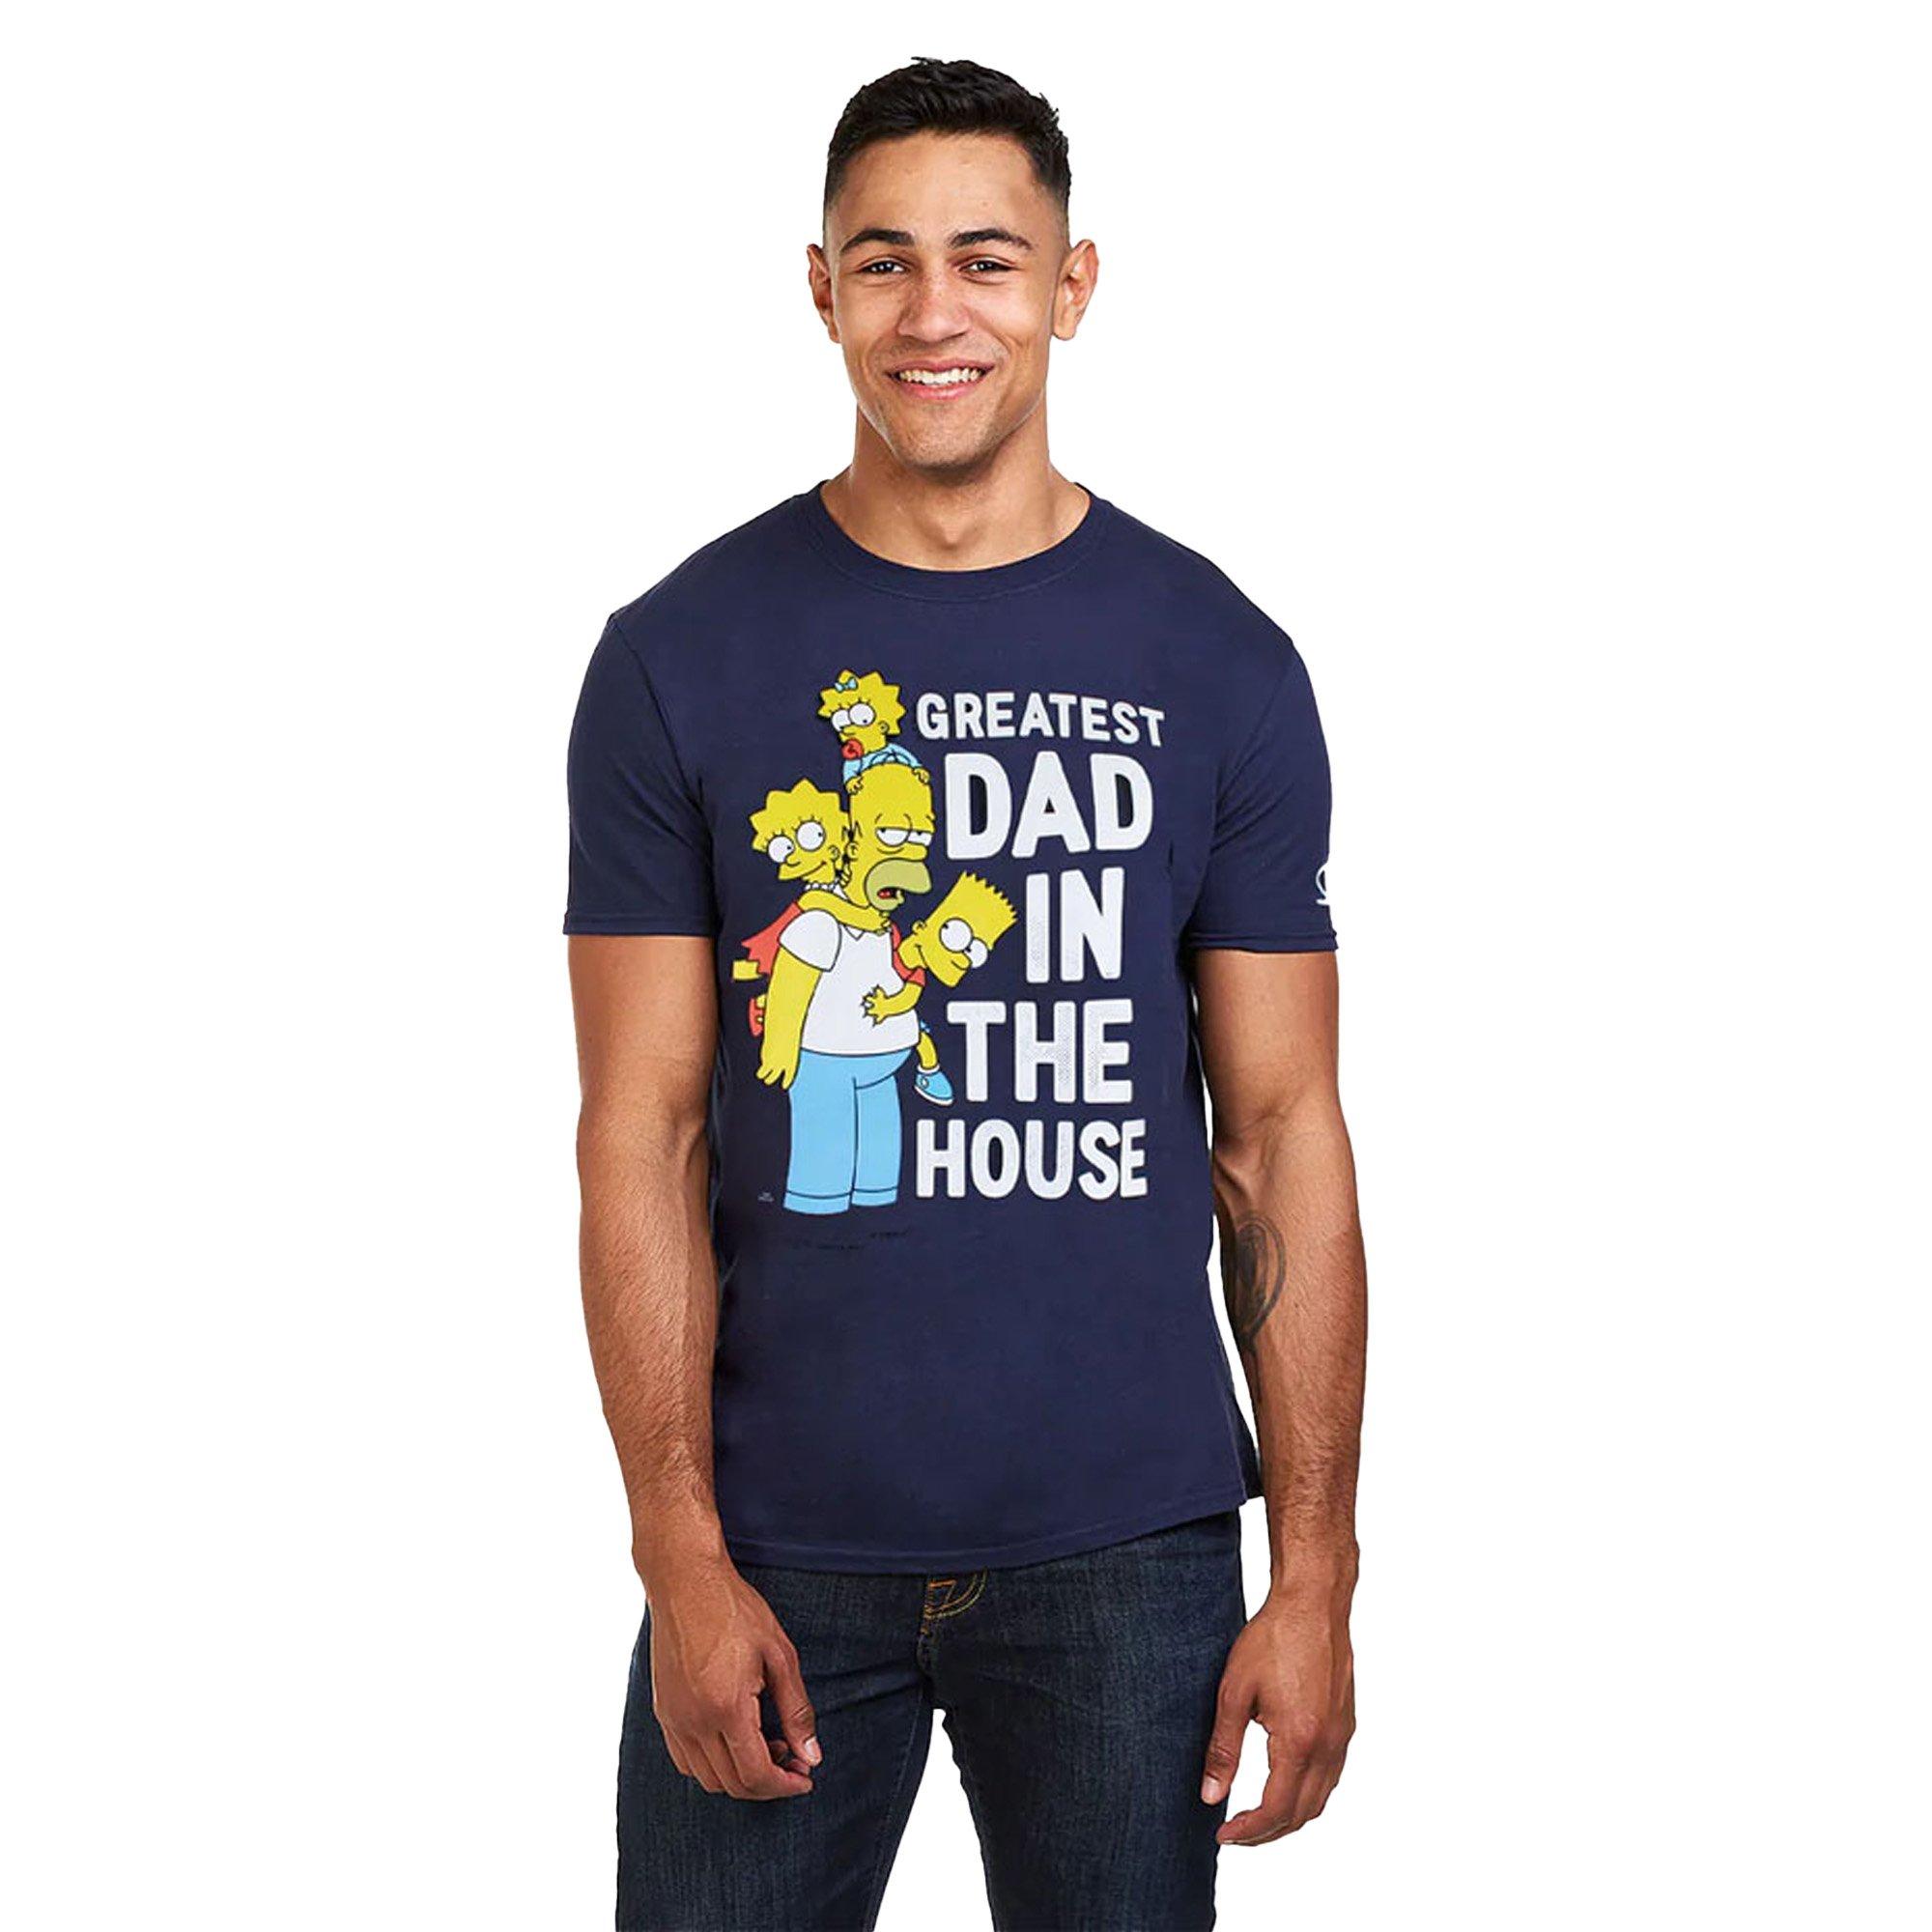 The Simpsons  Greatest Dad In The House TShirt 